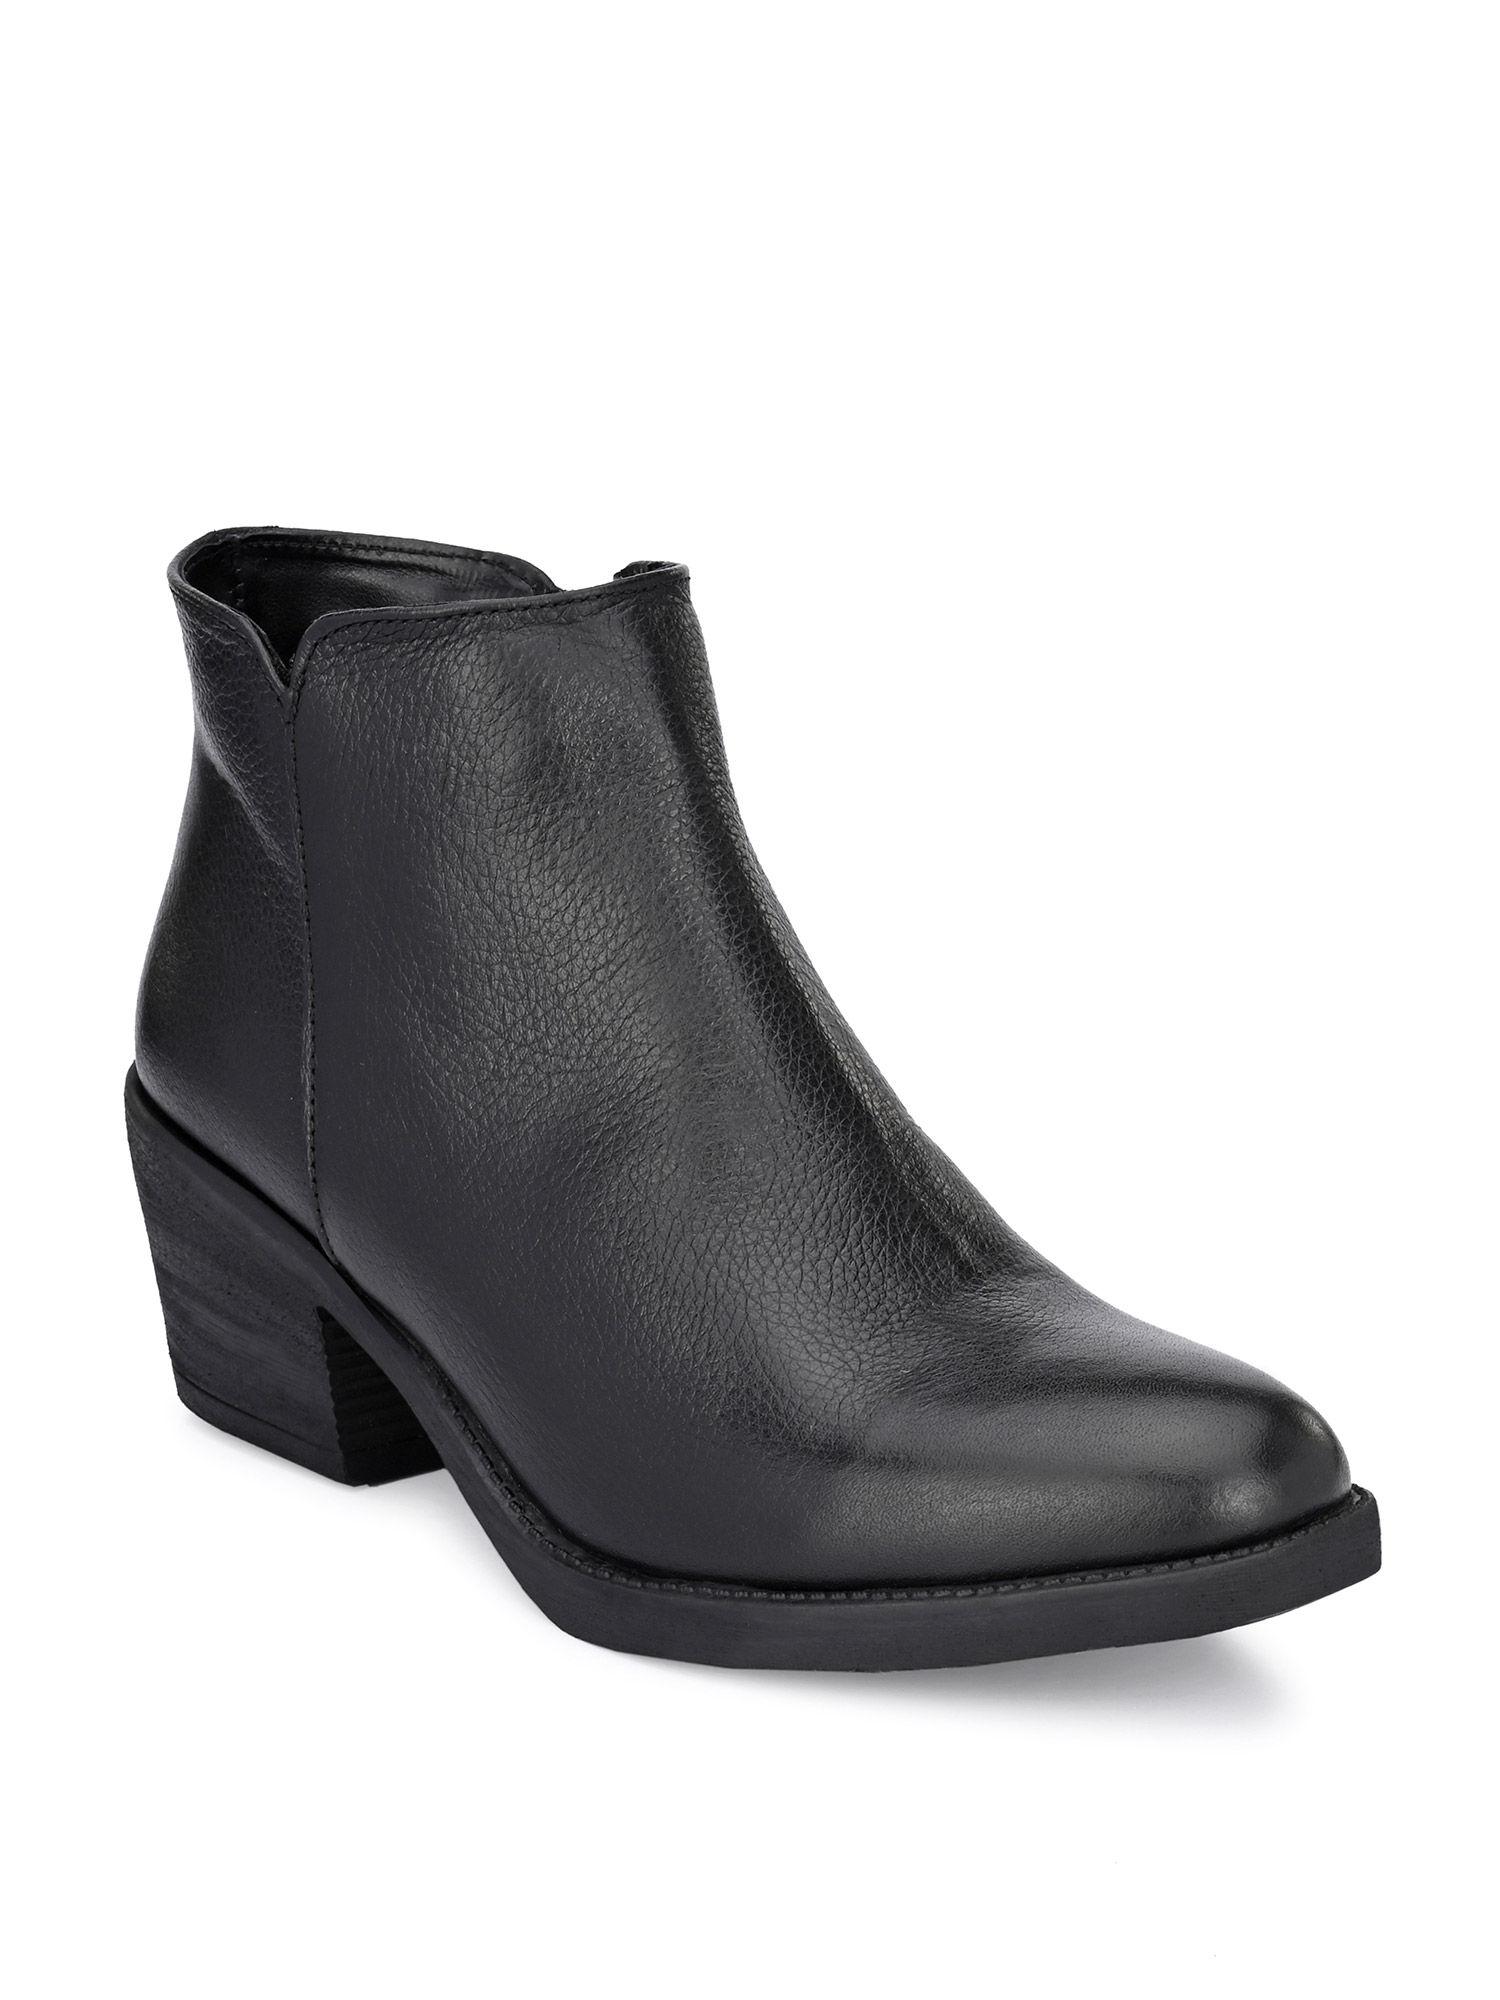 solid black leather ankle boot